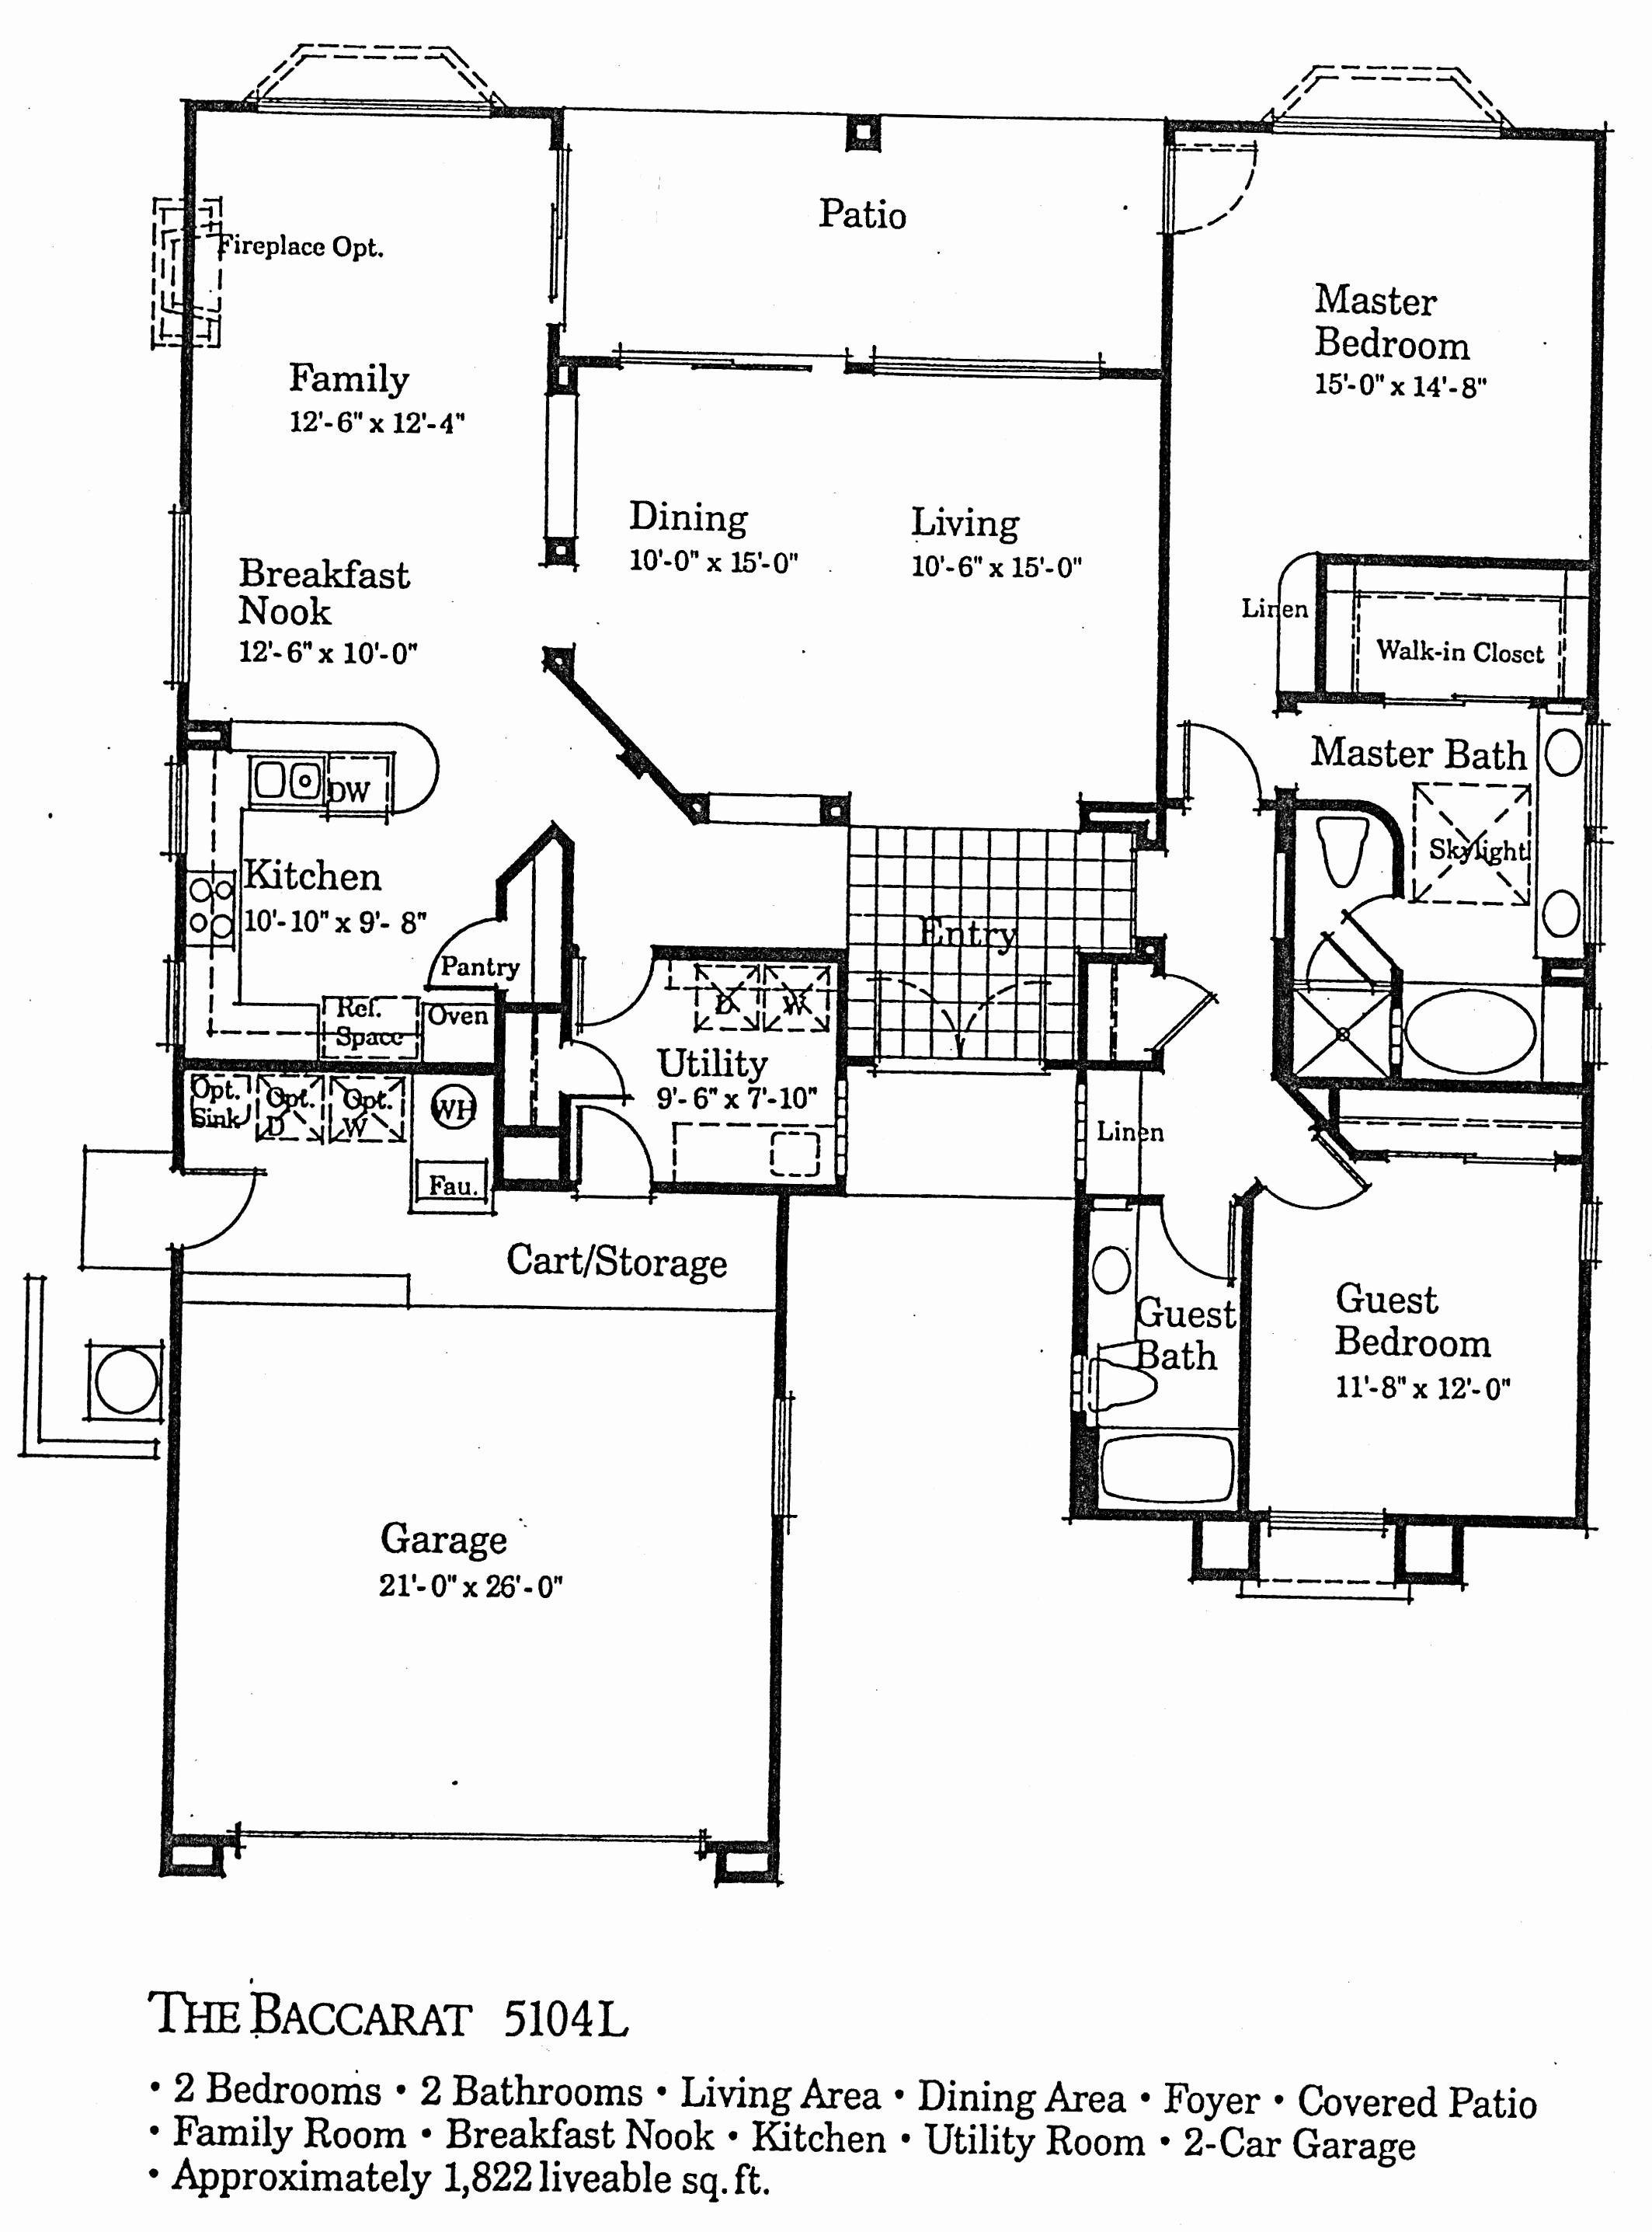 ranch magazine cape cod ranch style house plans cap cod house plans new cape cod of ranch magazine